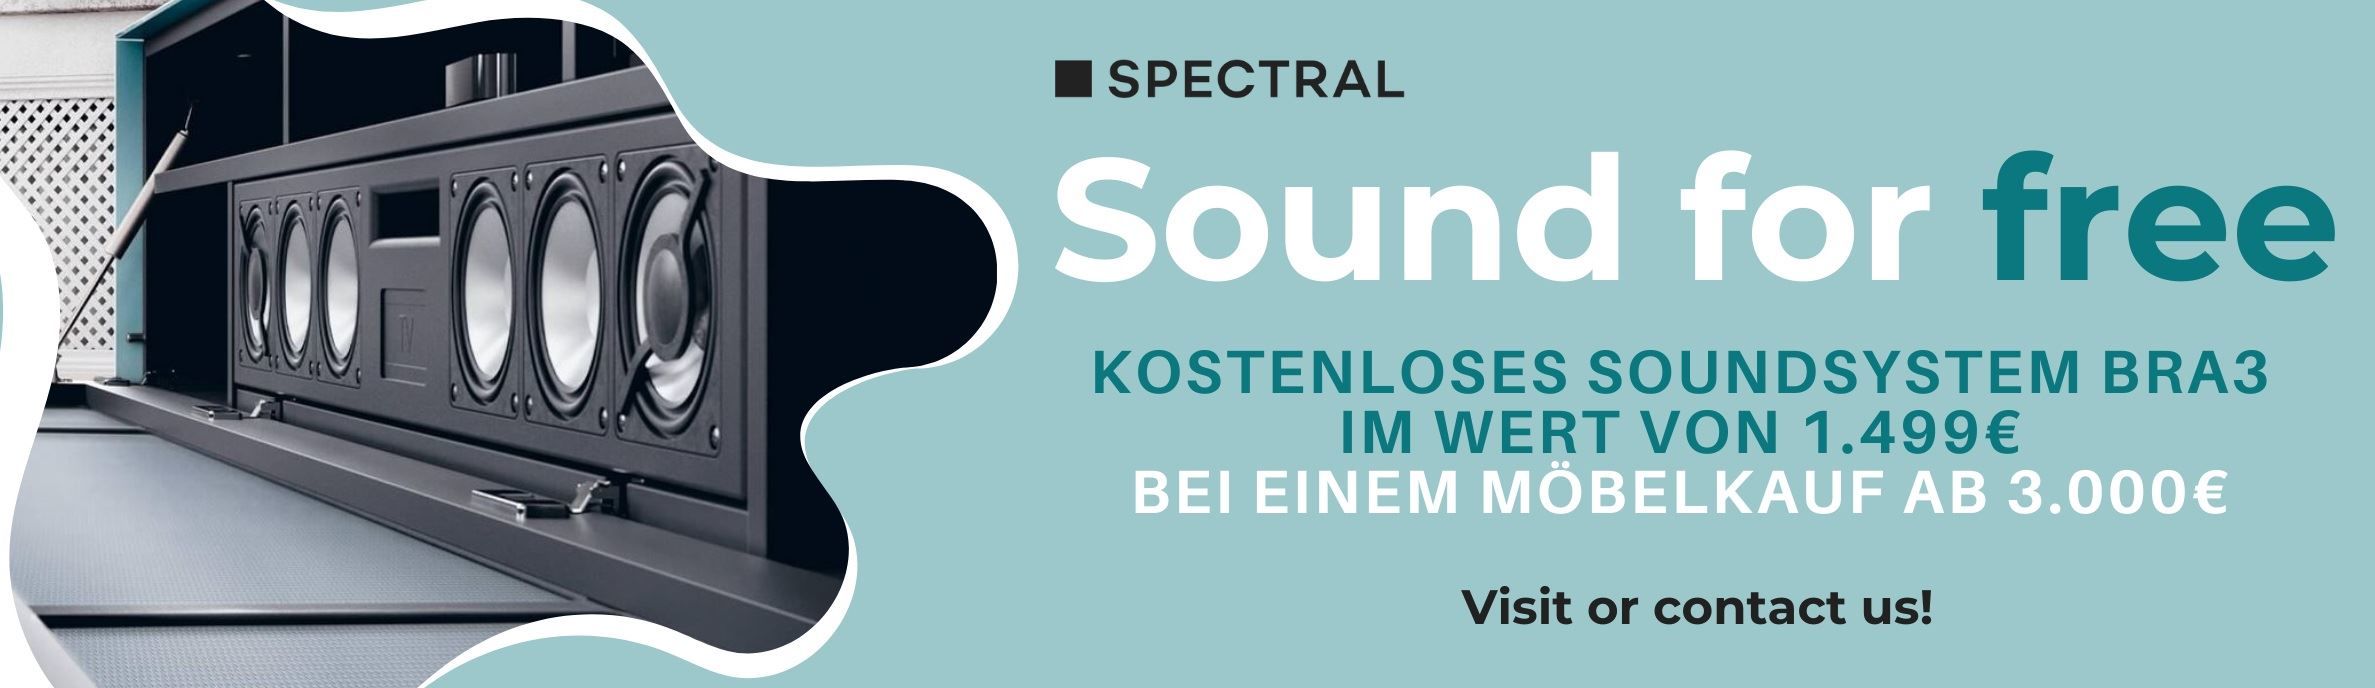 spectral sound for free